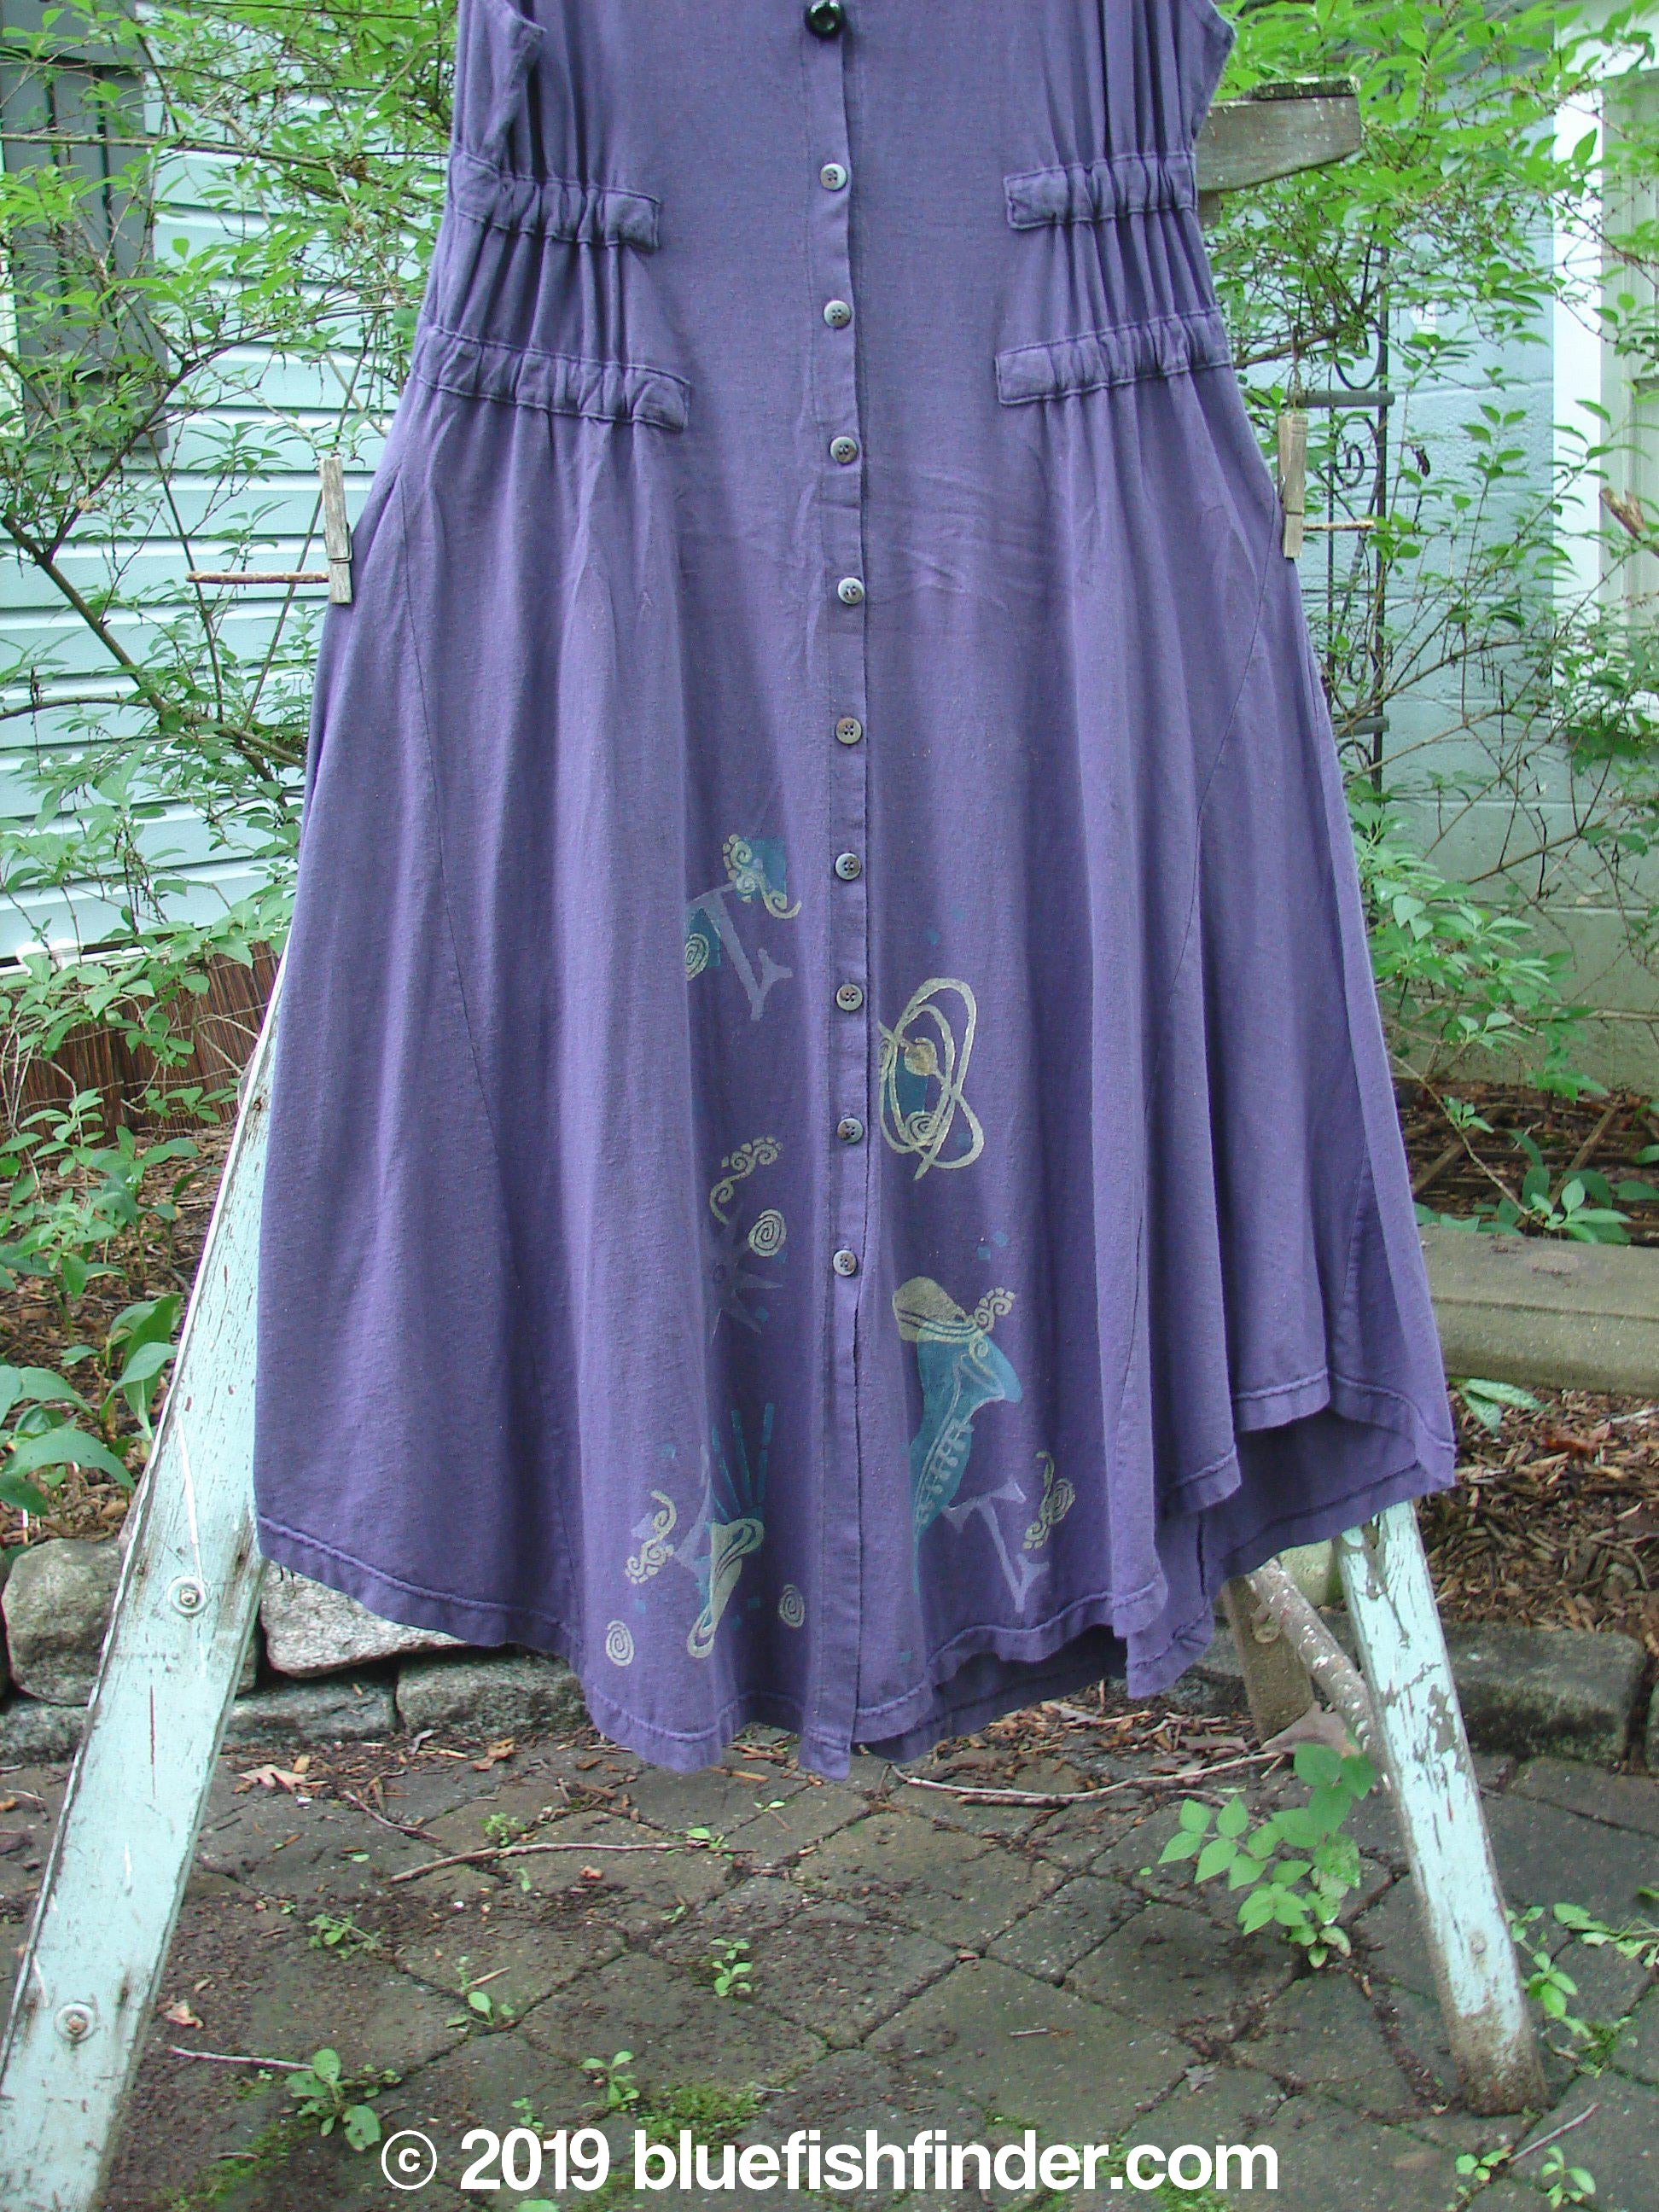 1994 Spin Jumper Mixed Purple Nuit Size 2: A purple dress with a design on it, featuring an empire waist, V-shaped neckline, and sweeping hemline.